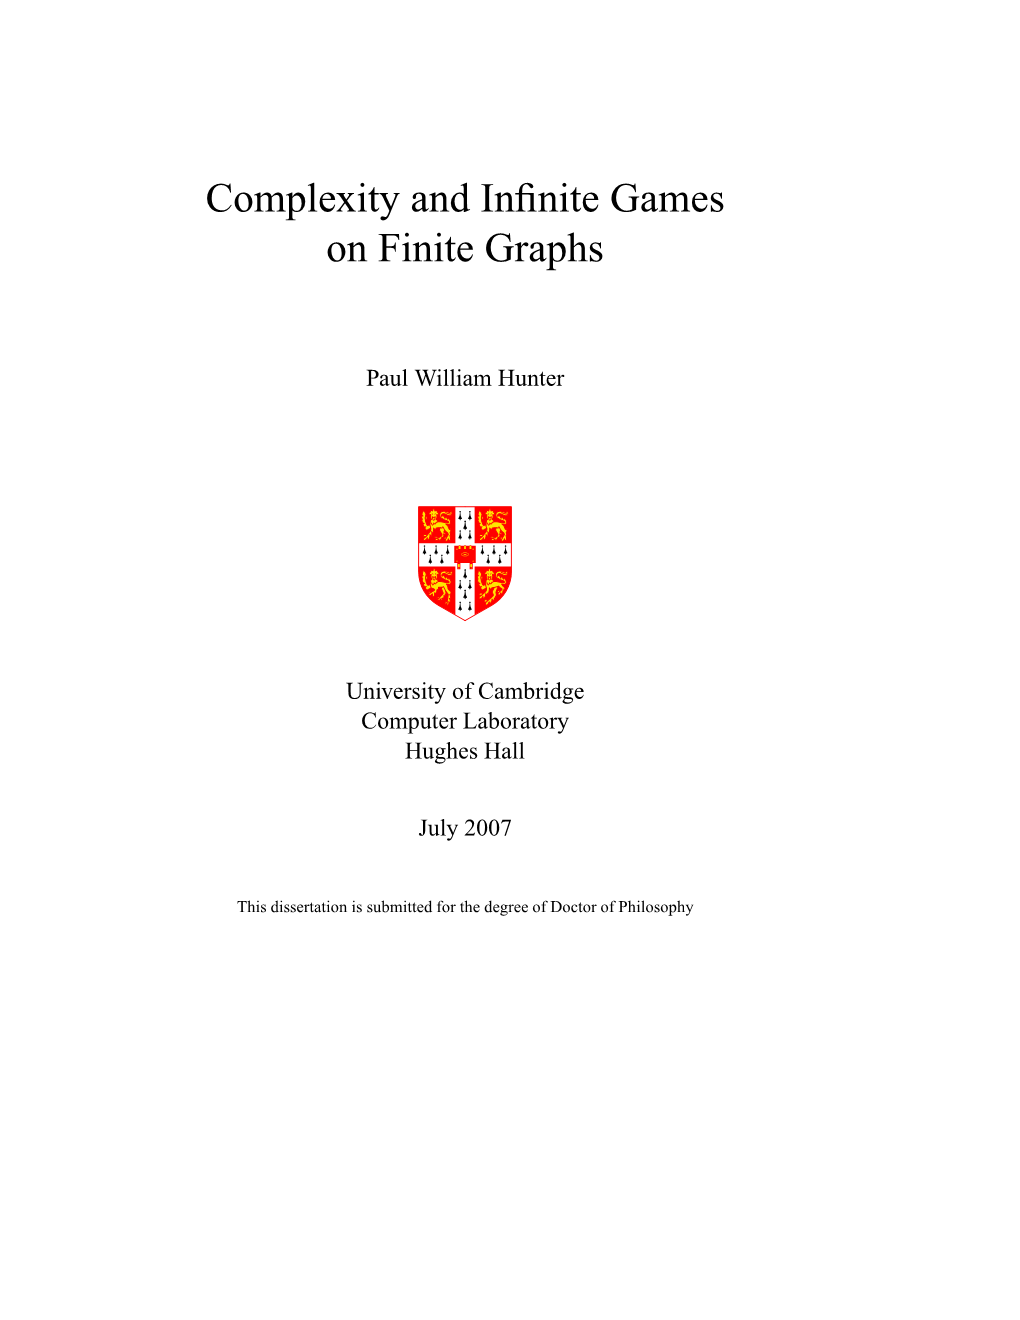 Complexity and Infinite Games on Finite Graphs